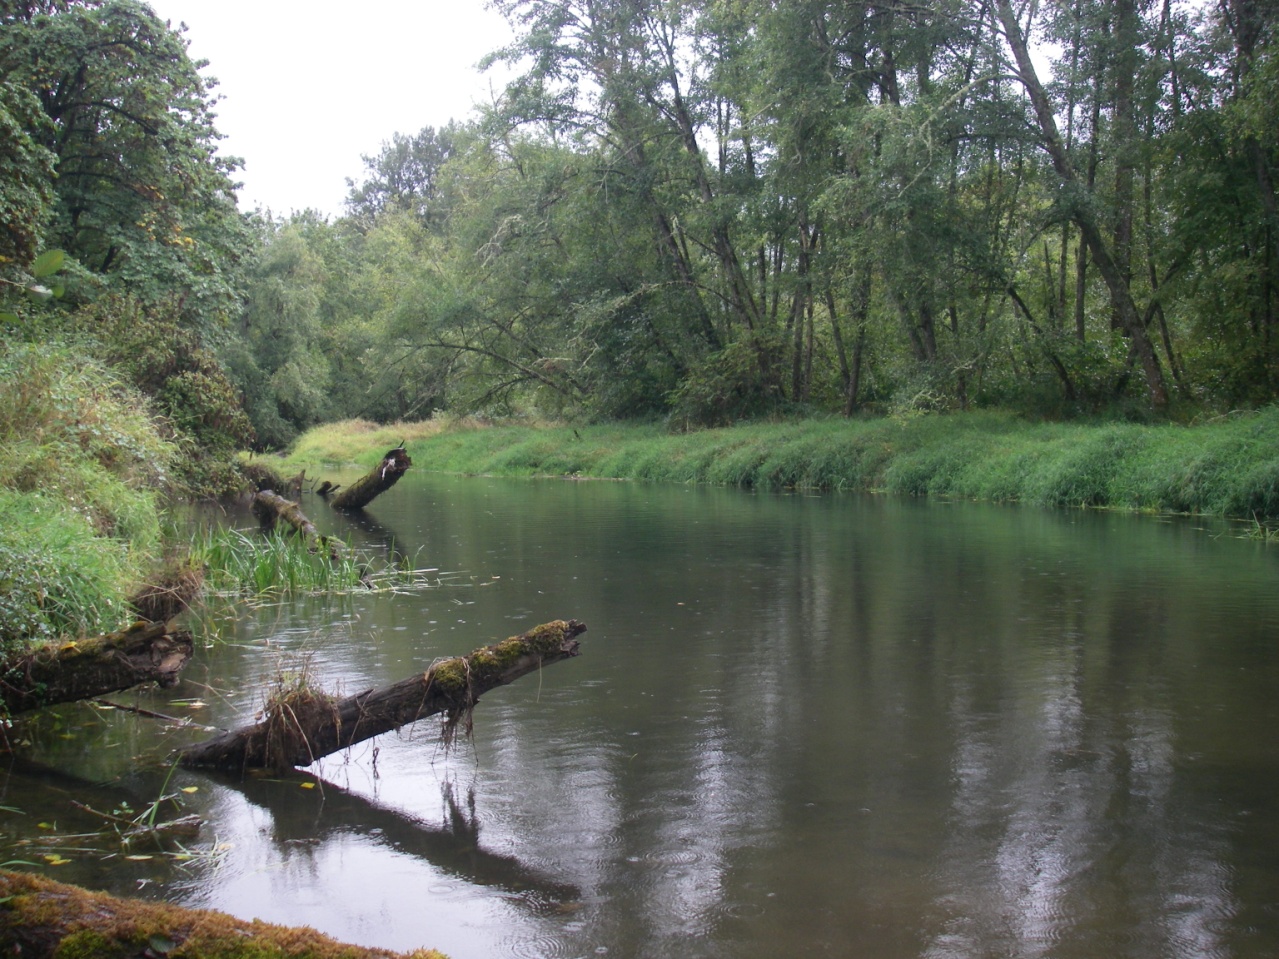 Chub are essentially an indicator that the health of the Willamette River system is improving.